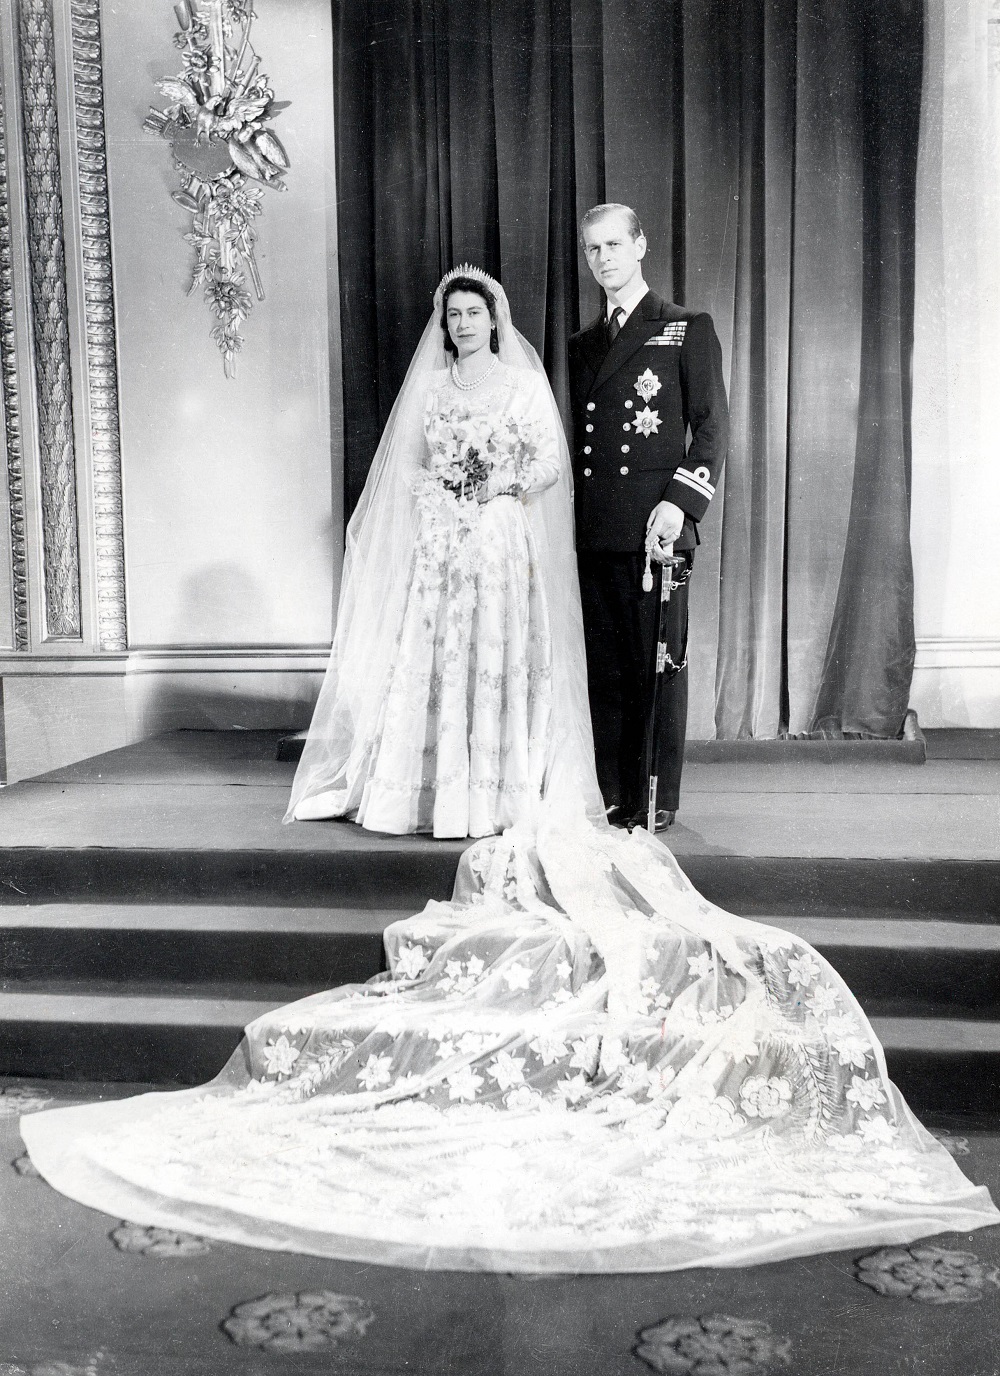 Photograph of Princess Elizabeth (future Queen Elizabeth II) and Prince Philip on their wedding day in 1947